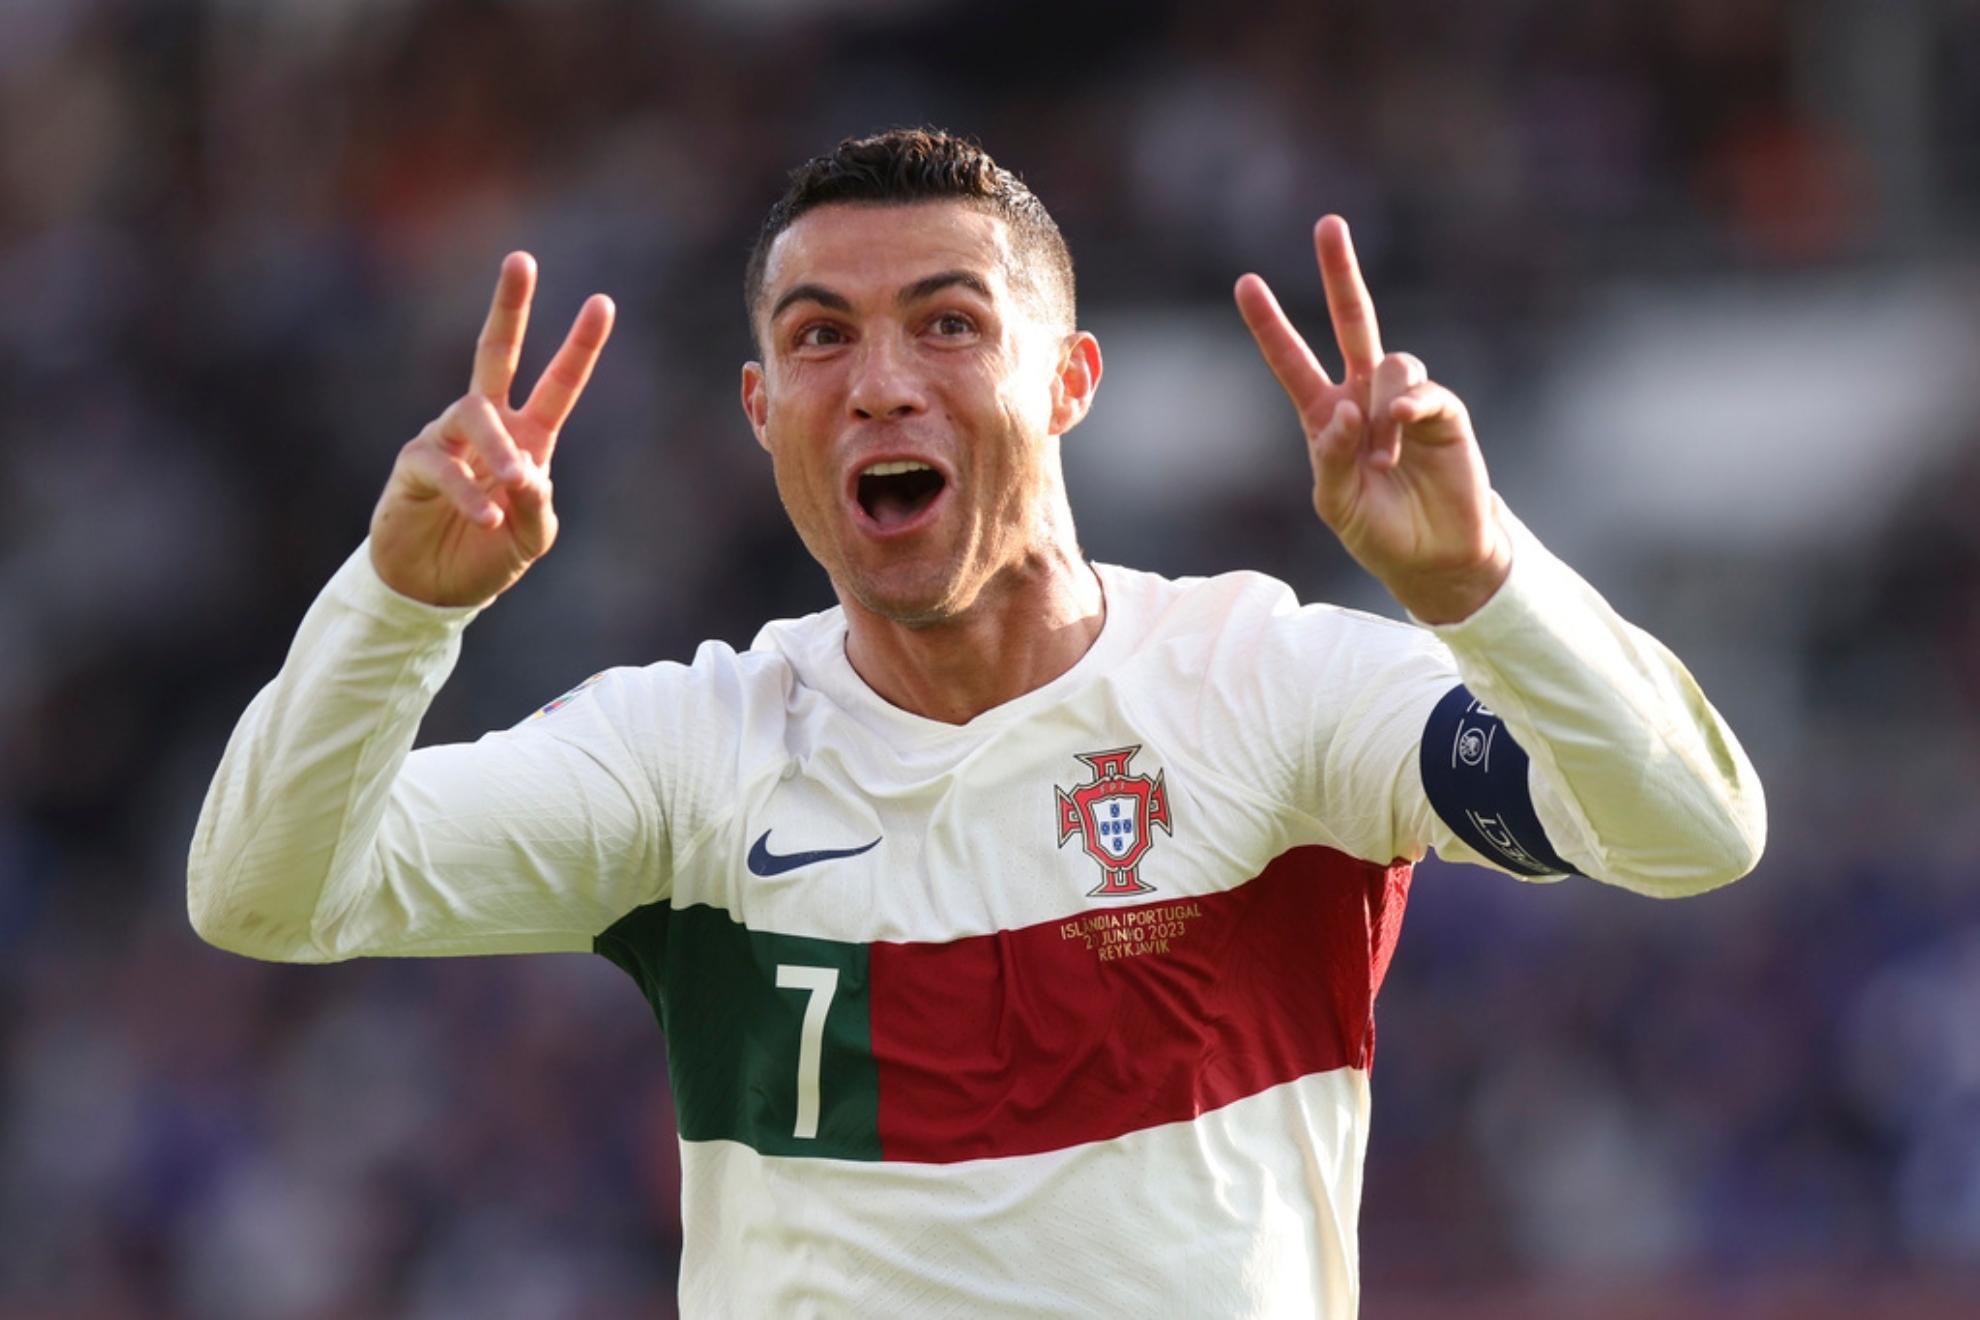 Cristiano Ronaldo becomes the Instagram GOAT by having over 600 million followers